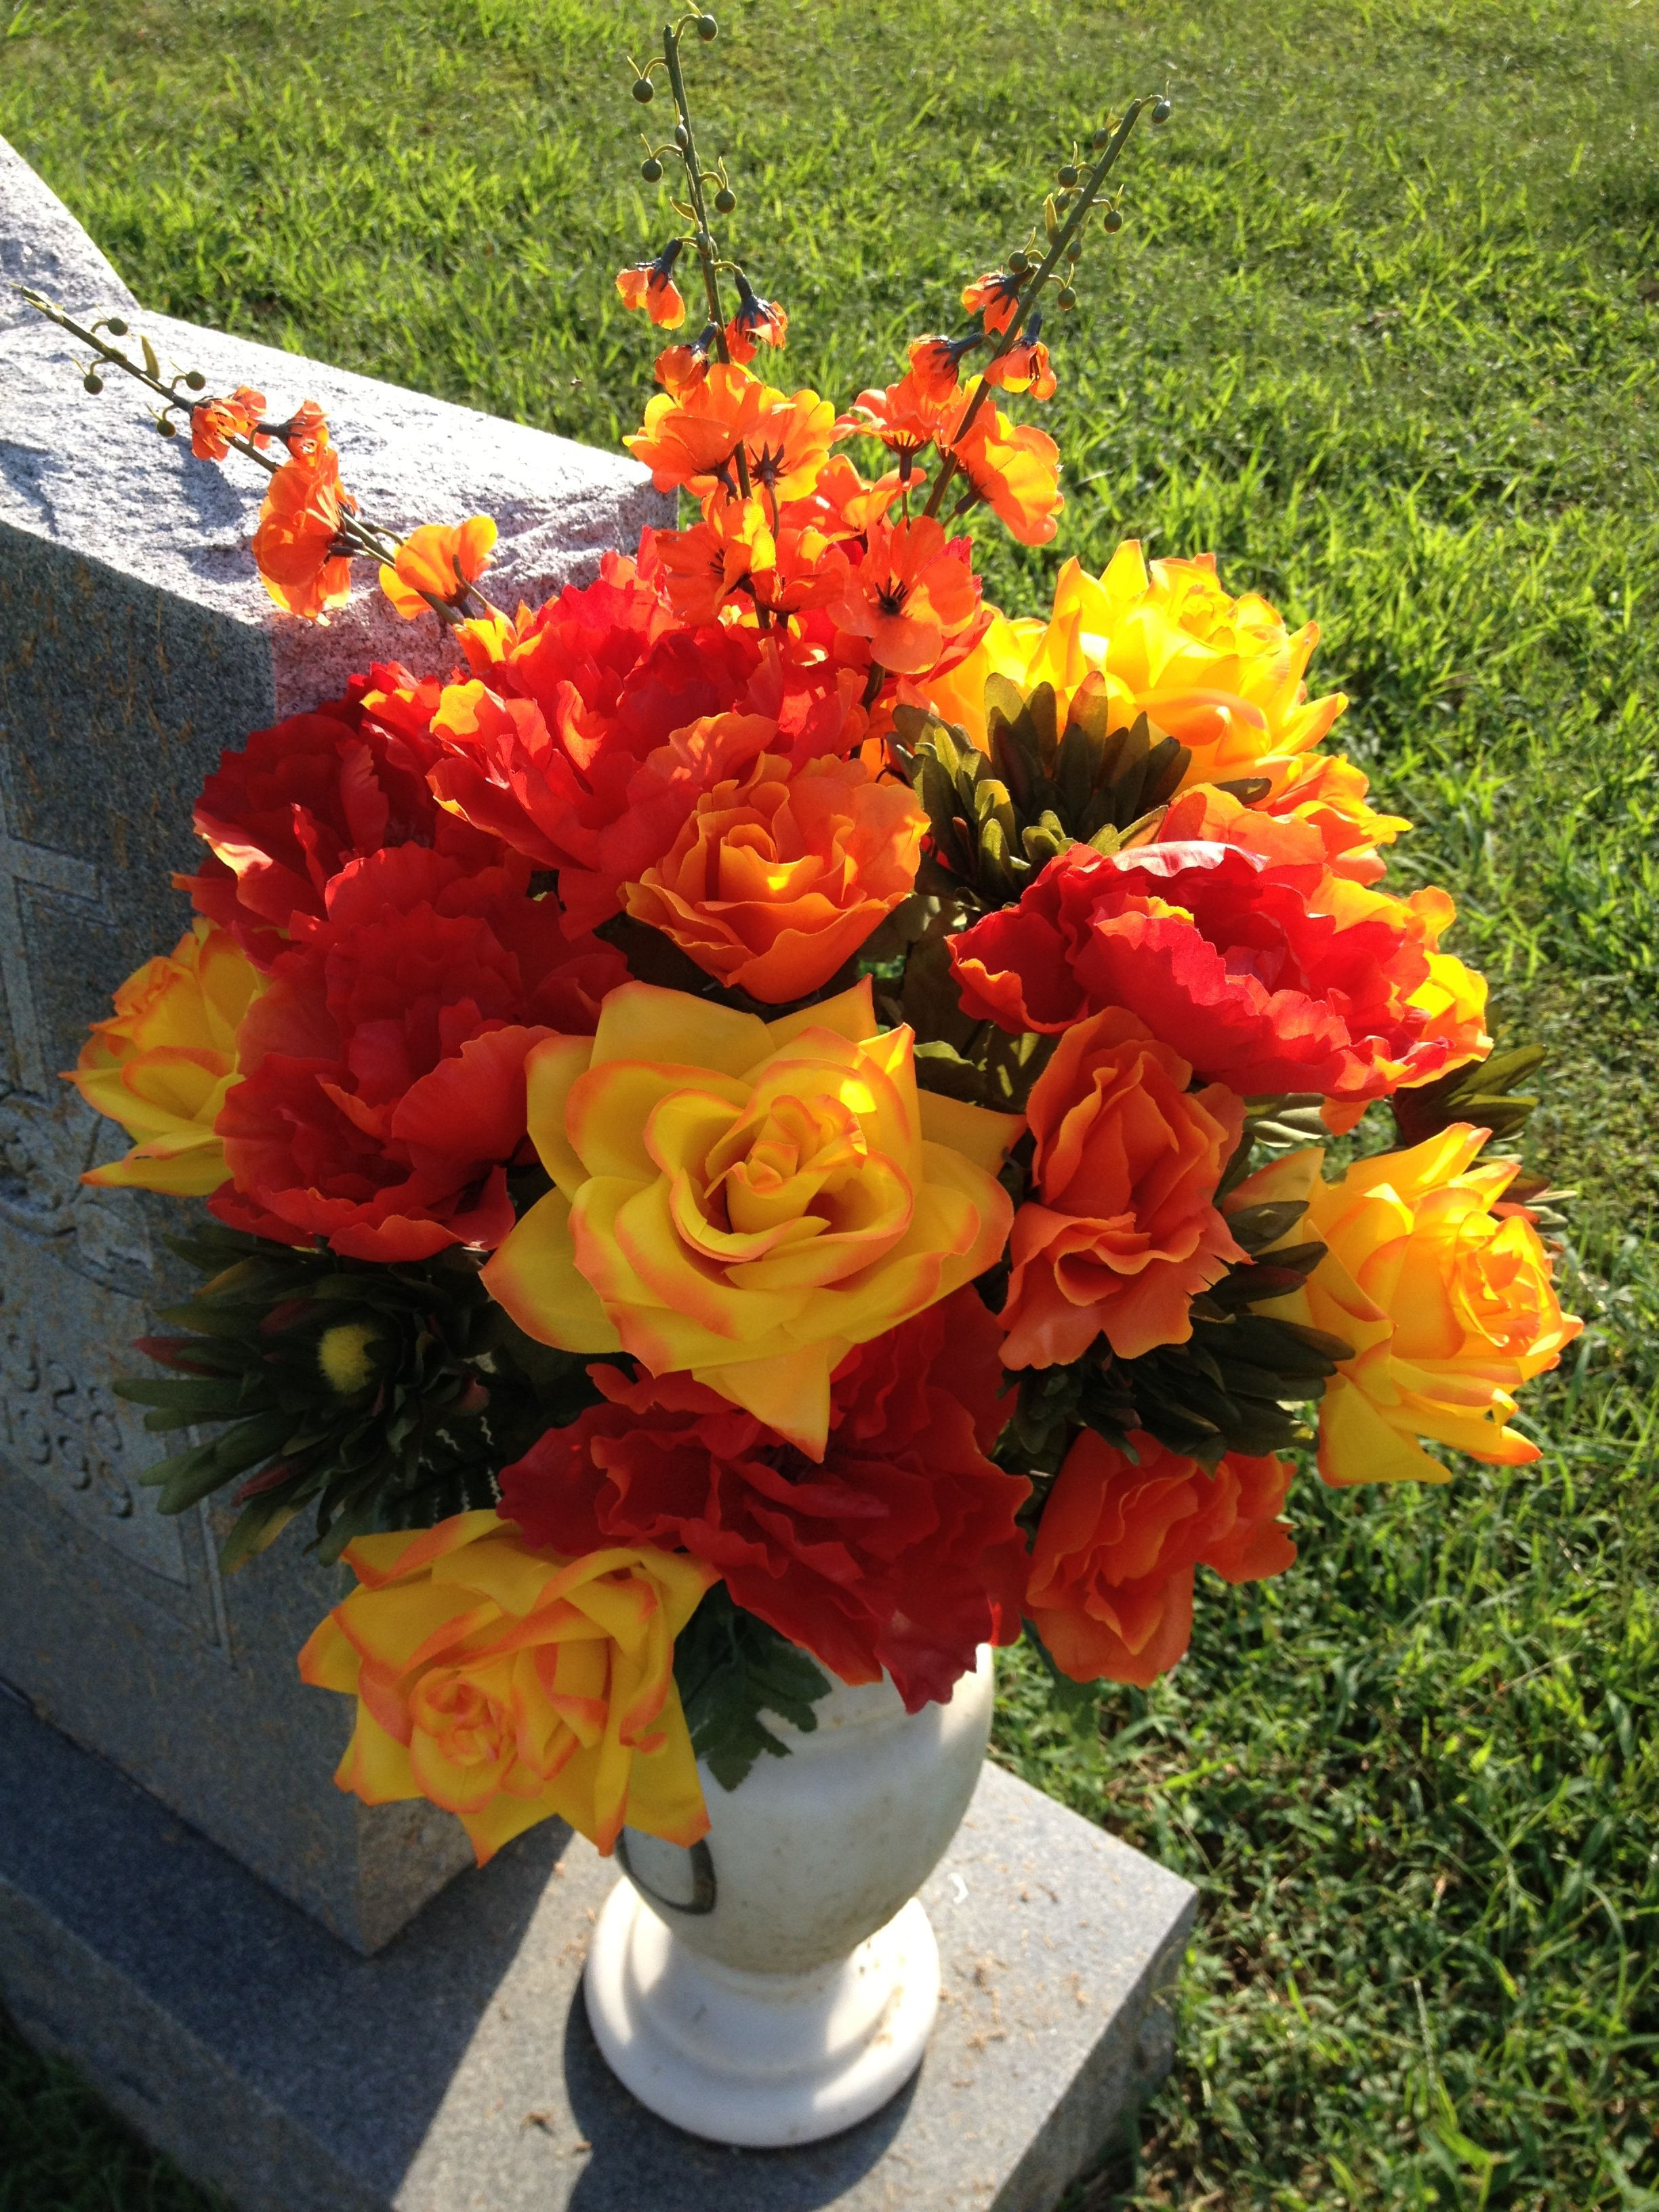 tombstone flower vases of fall 2013 vase by a darby cemetery flowers pinterest autumn for fall 2013 vase by a darby a· cemetery flowersvase